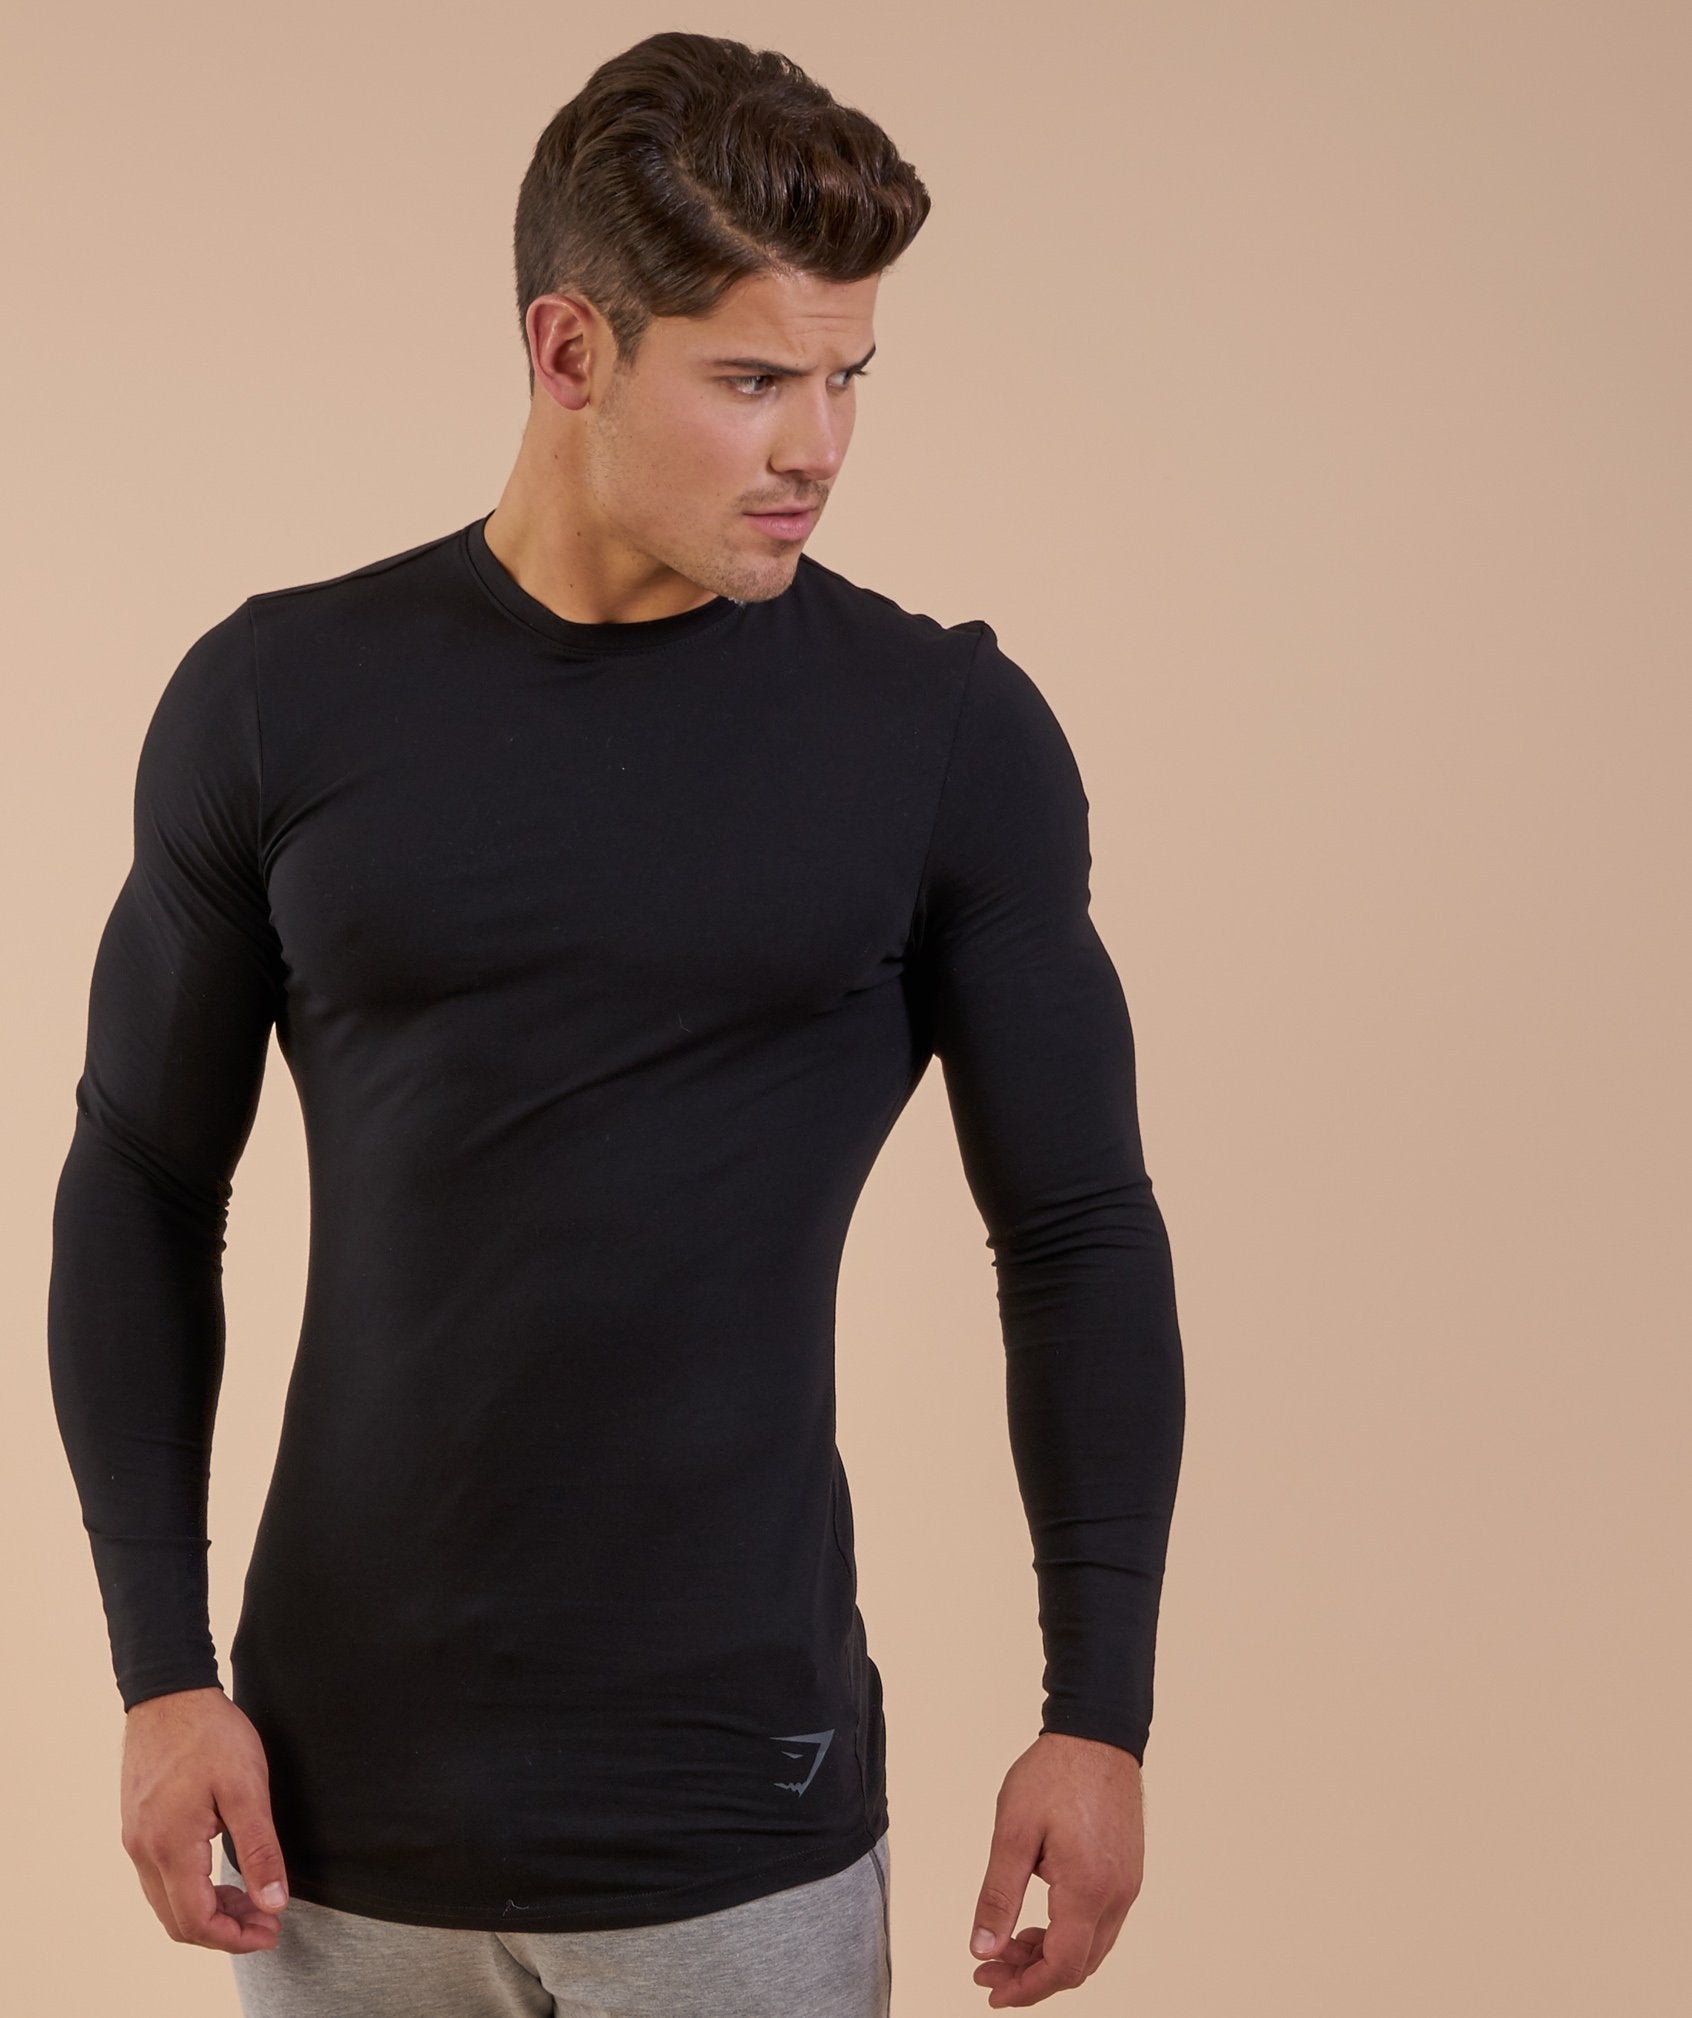 Solace Longline Long Sleeve T-shirt in Black - view 6